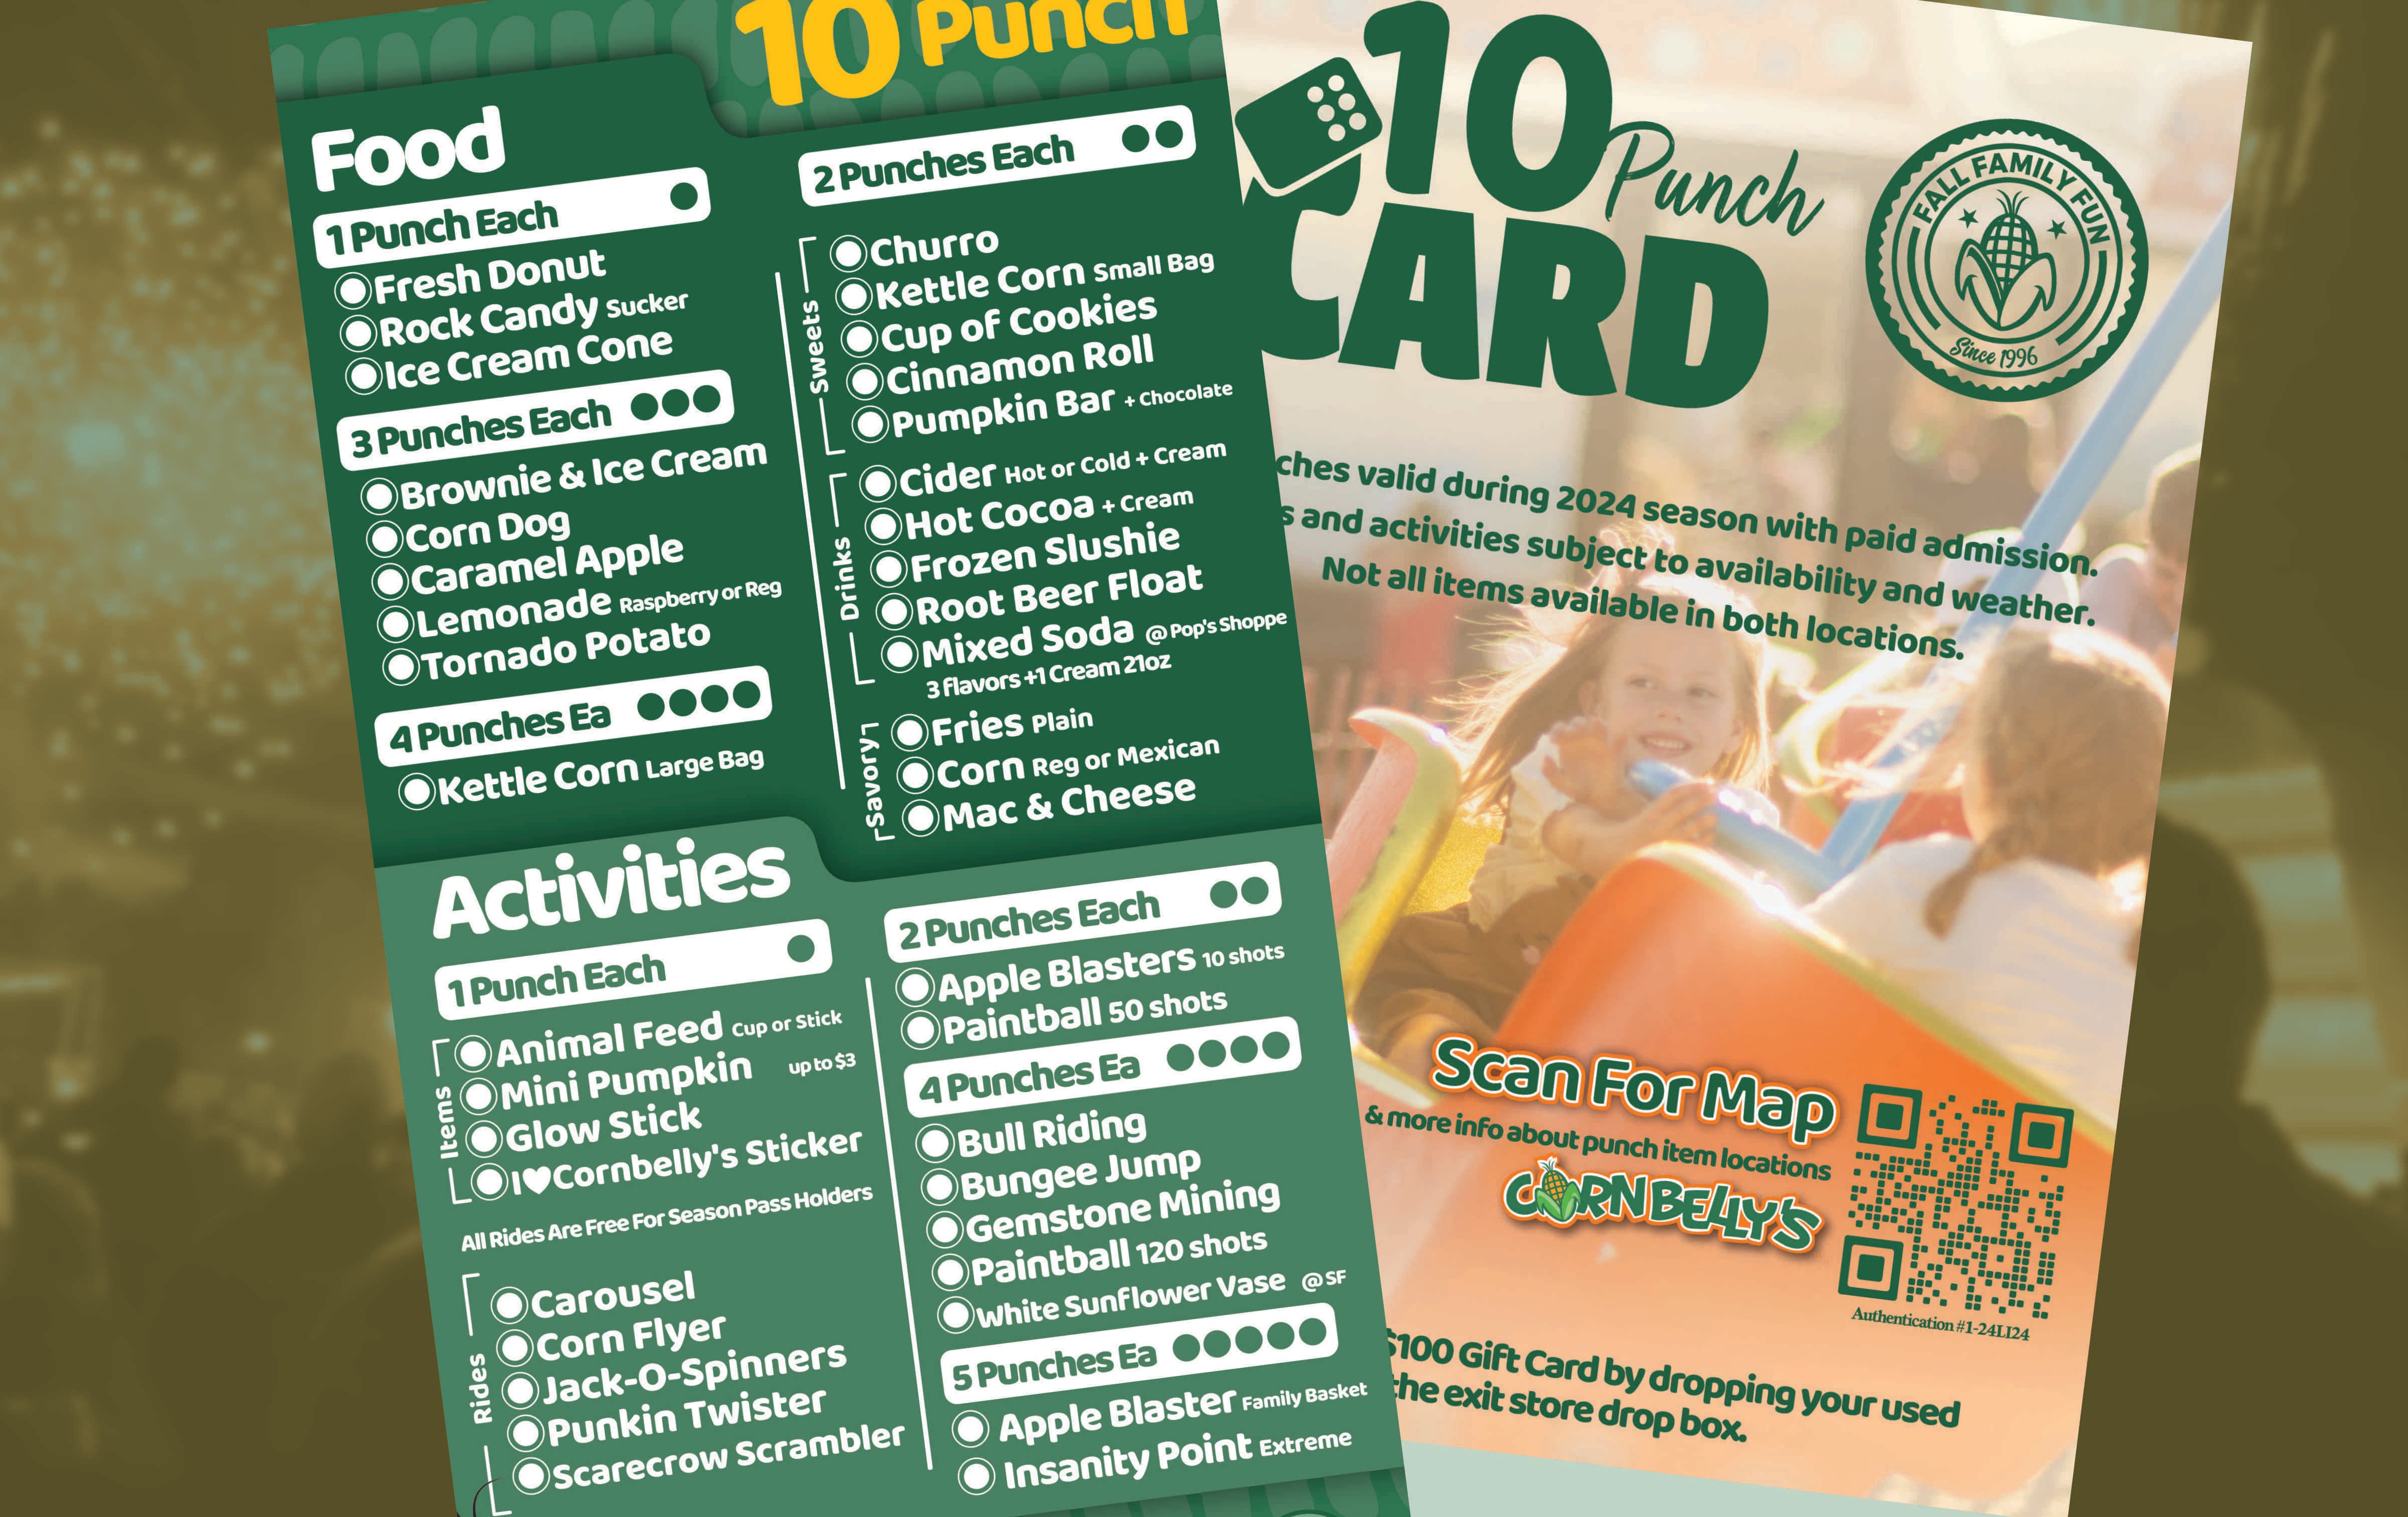 10 Punch Card